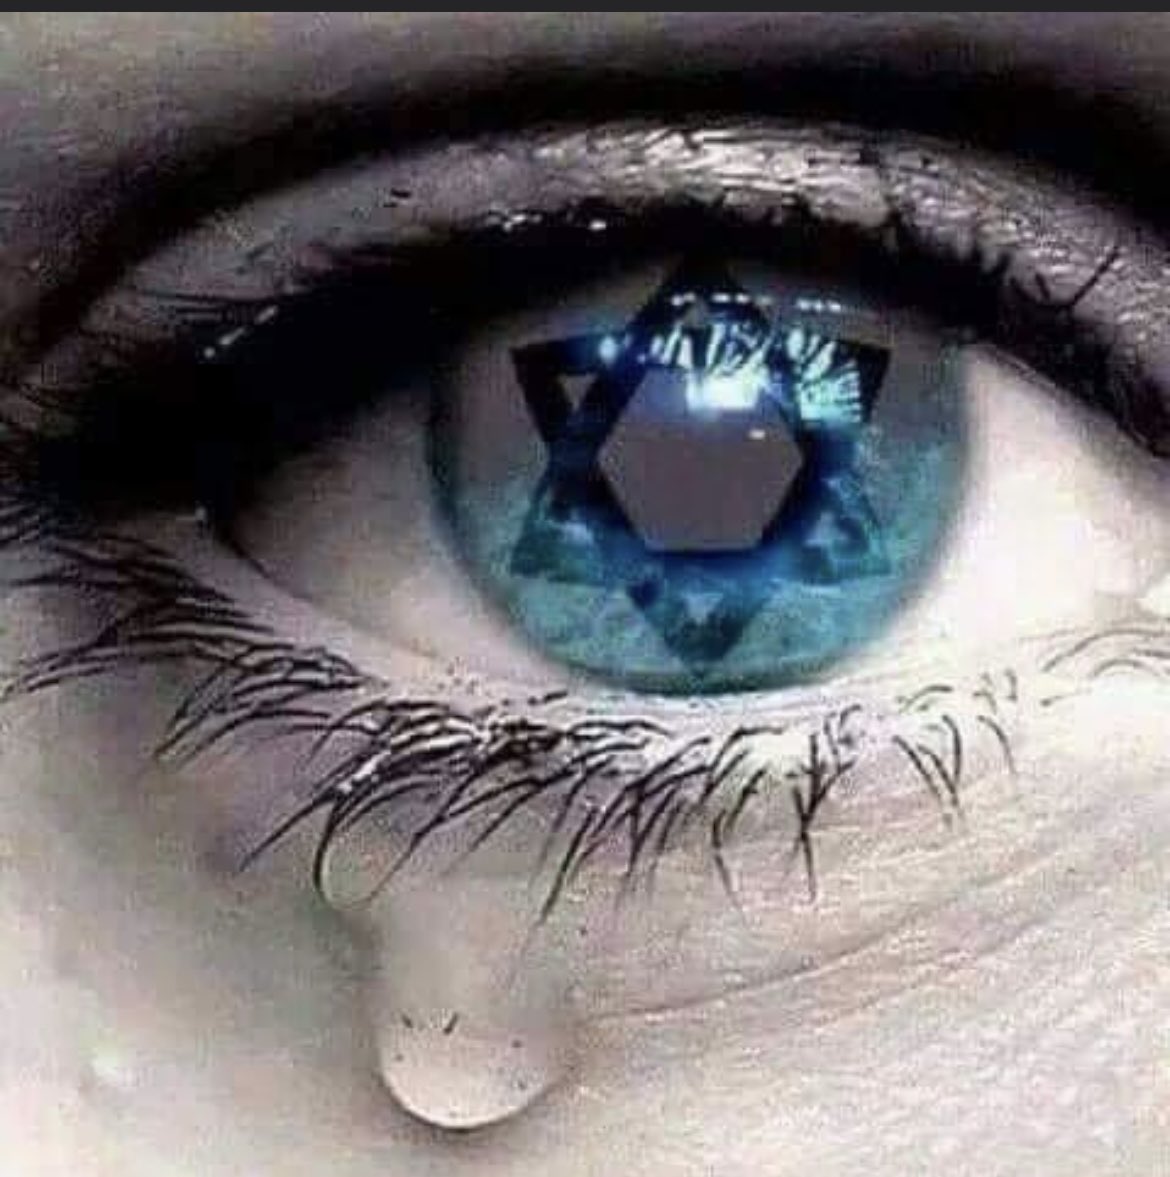 Heart broken but resilient #StandsWithIsrael